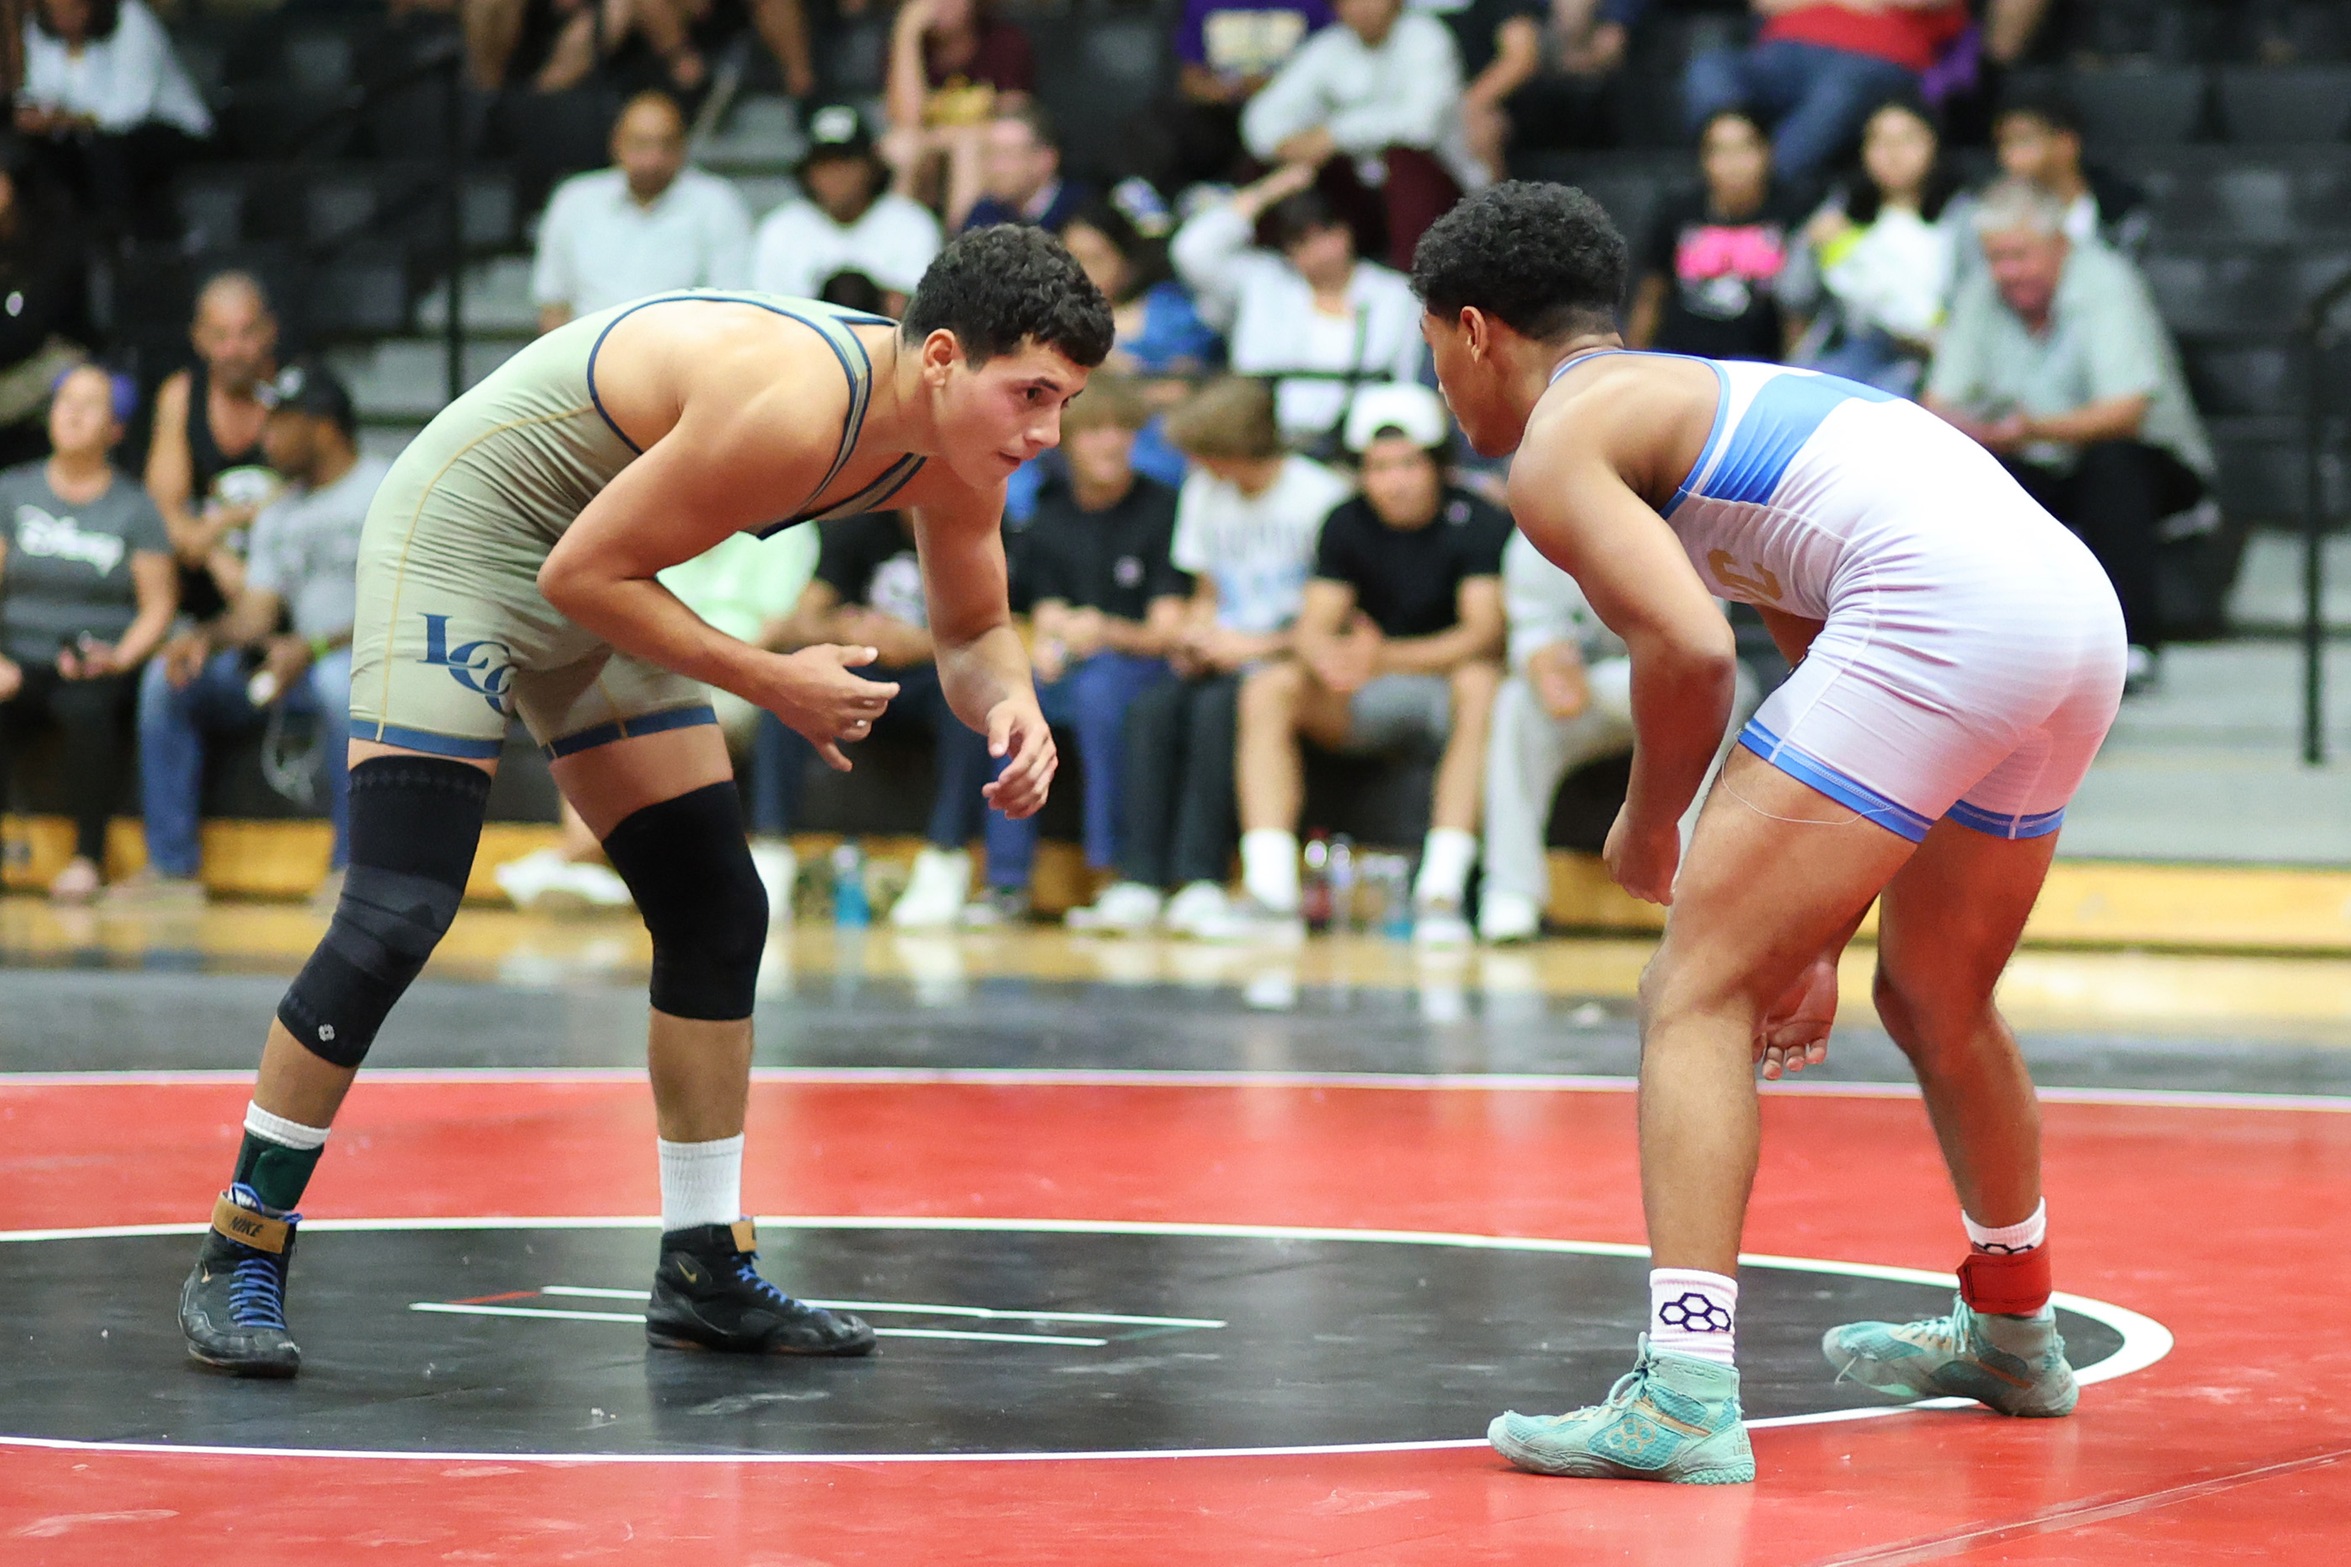 Anthony Perez (left) won by technical fall (22-5) in the Victor Valley College dual. Perez is currently ranked No. 6. Photo by Hugh Cox.